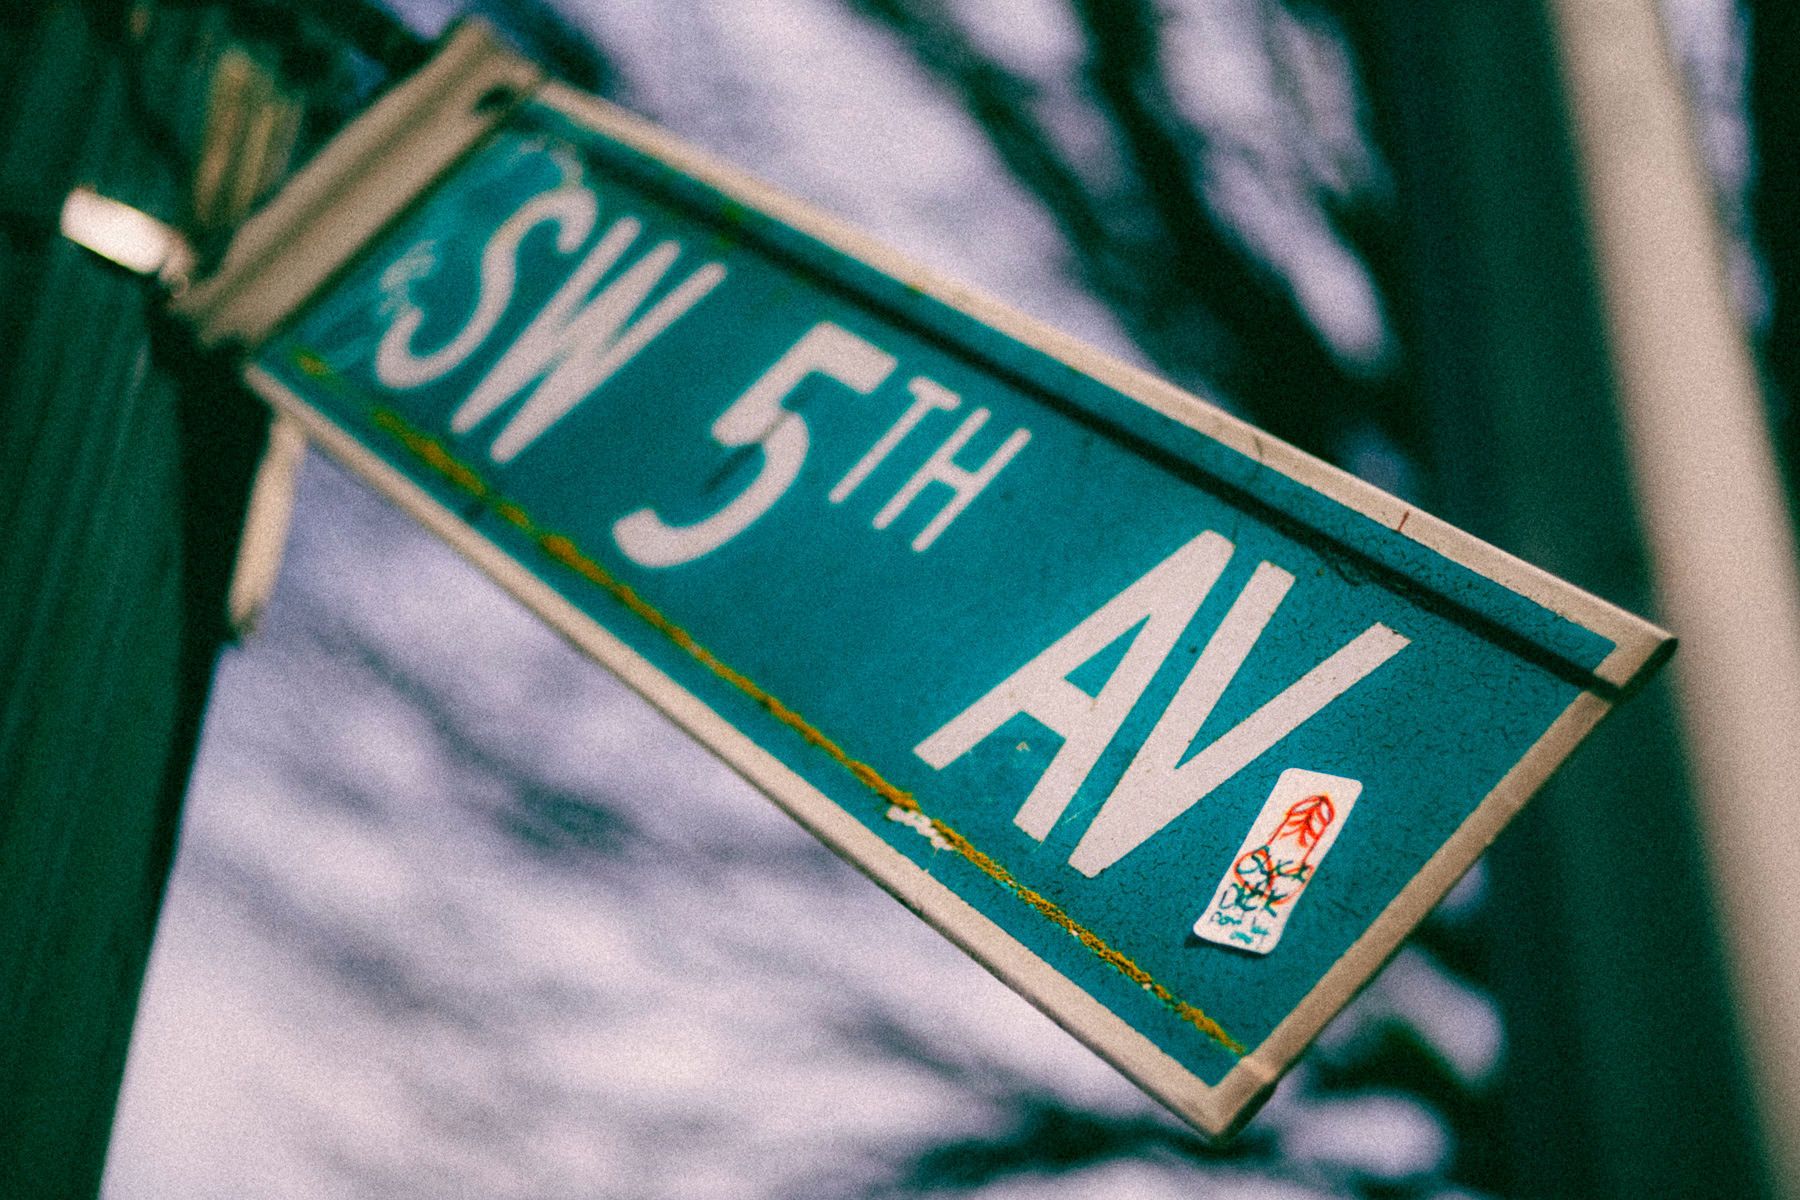 A downwards tilting street sign reading “SW 5th AV” and a sticker on its surface with a hand drawn penis and the words, “suck dick”.